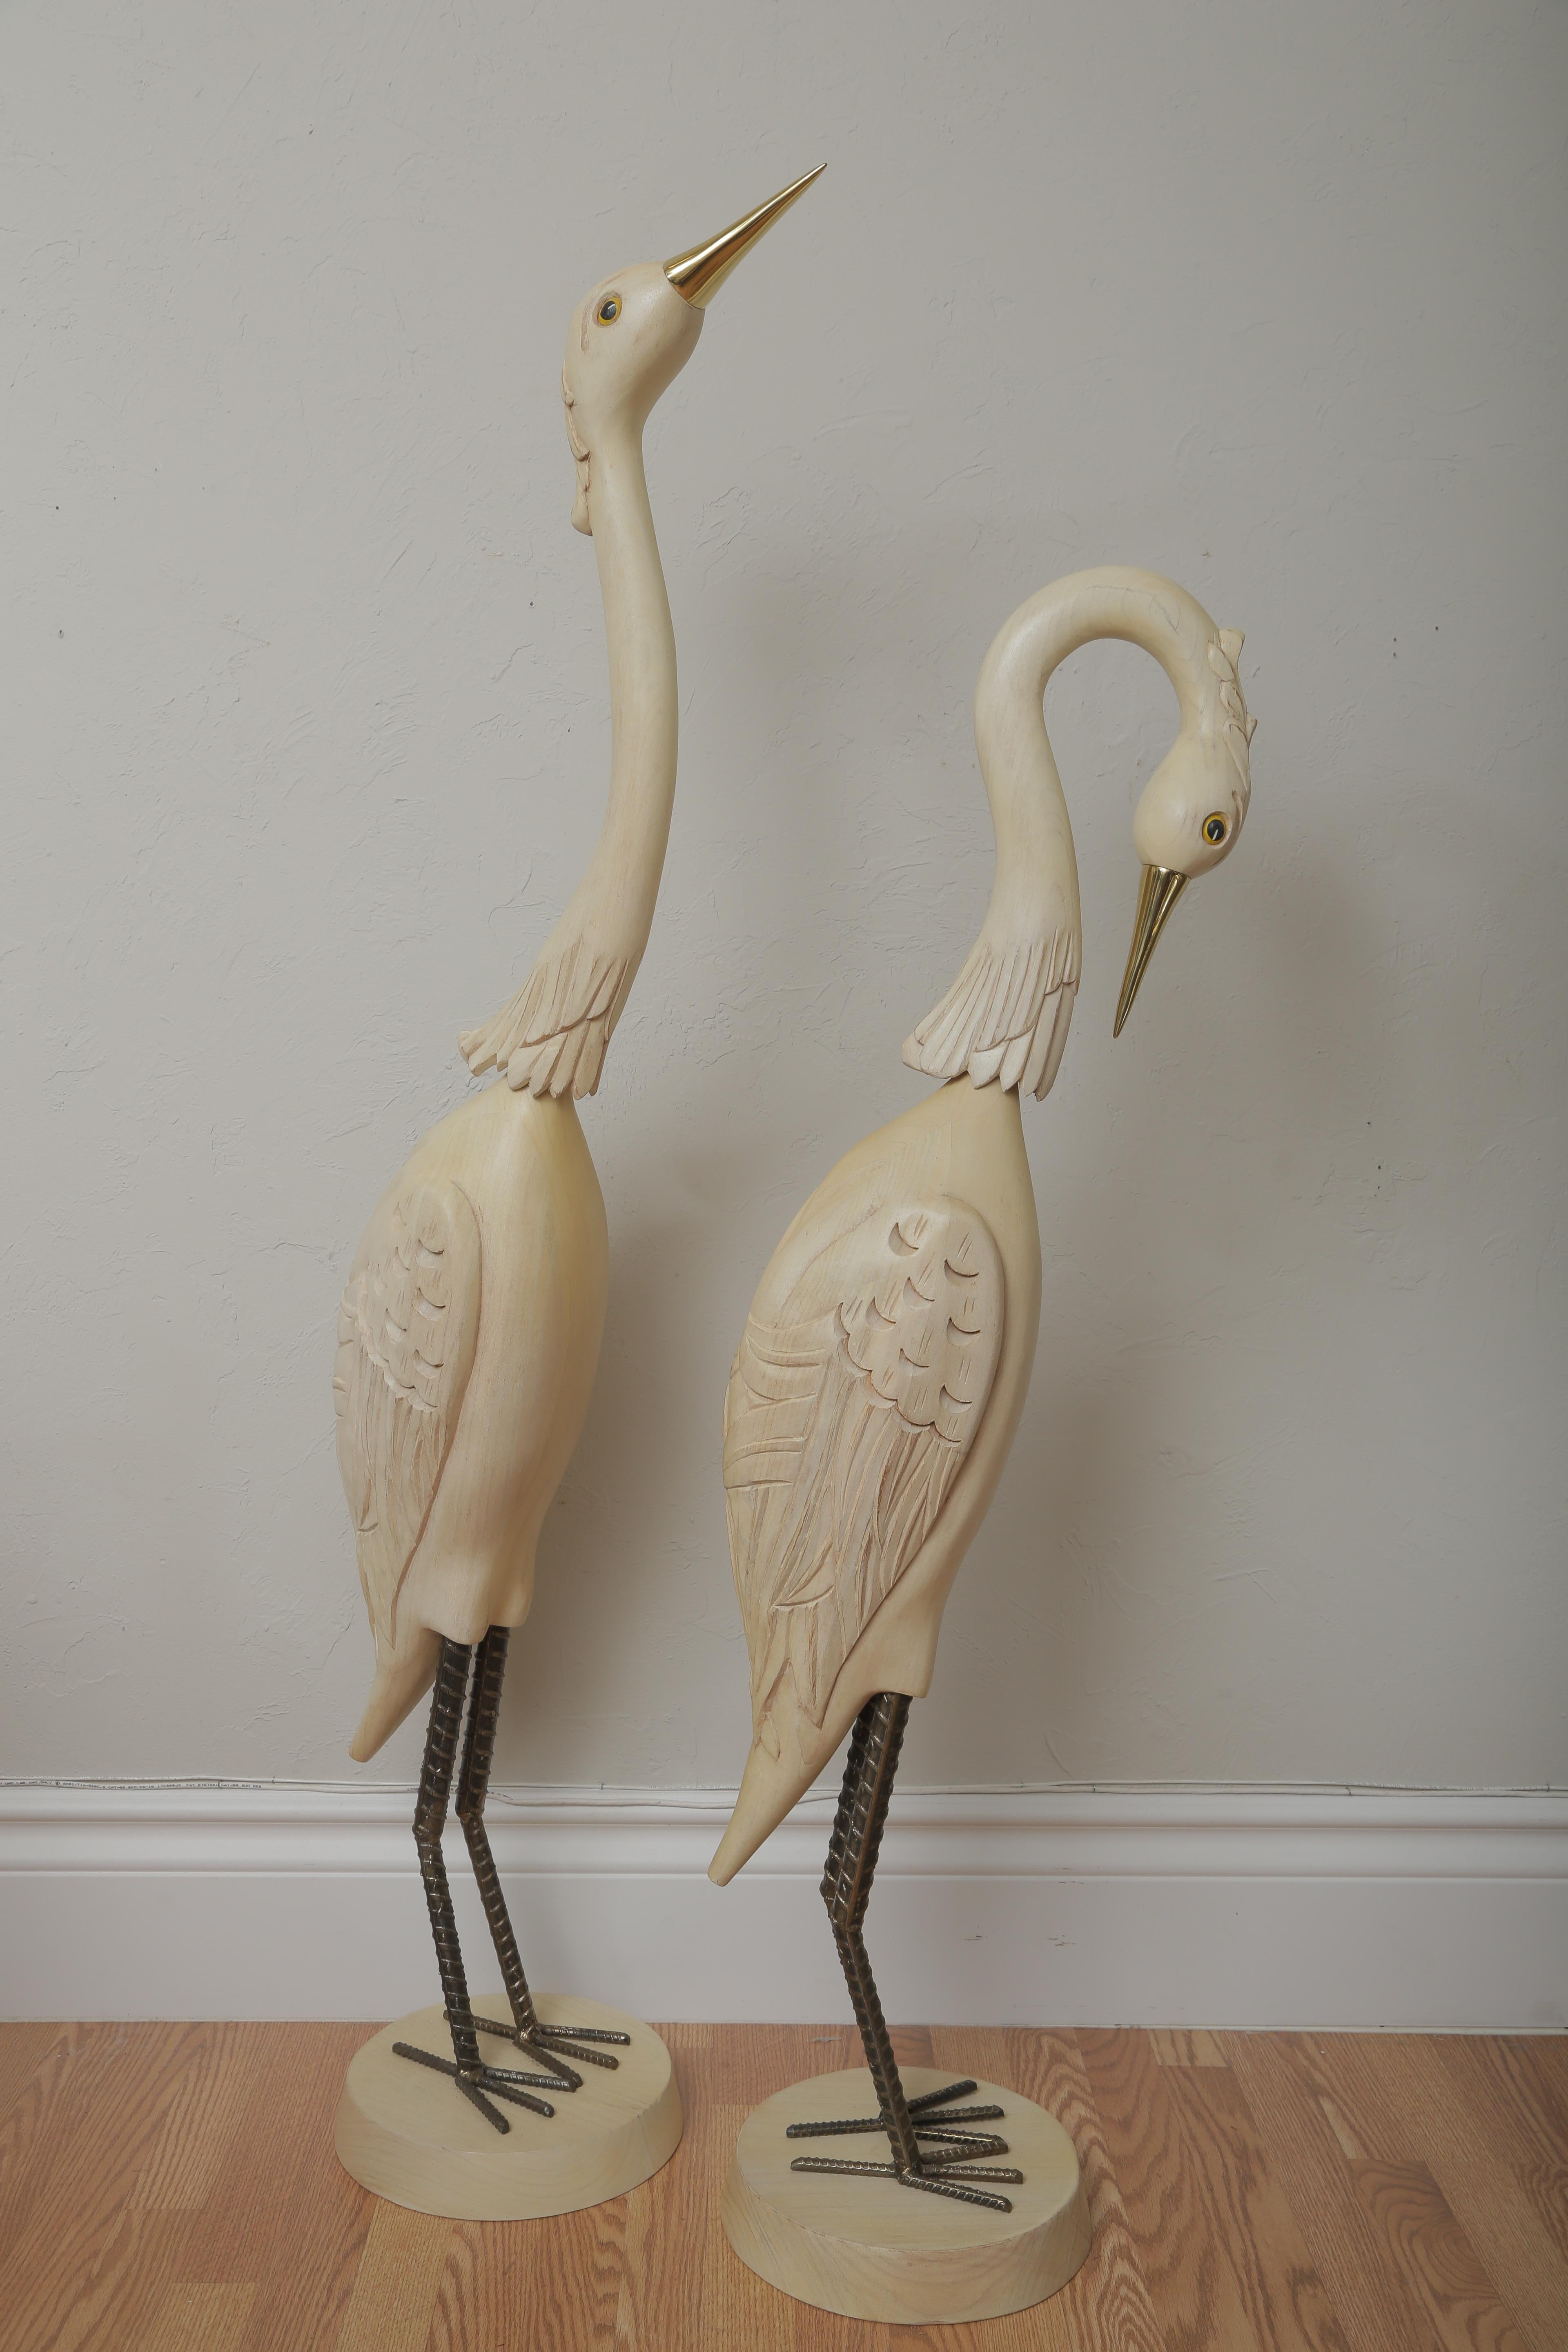 Pair of large carved wood Herons with brass beaks and iron legs on round wood bases. One has head up and the other has head down.